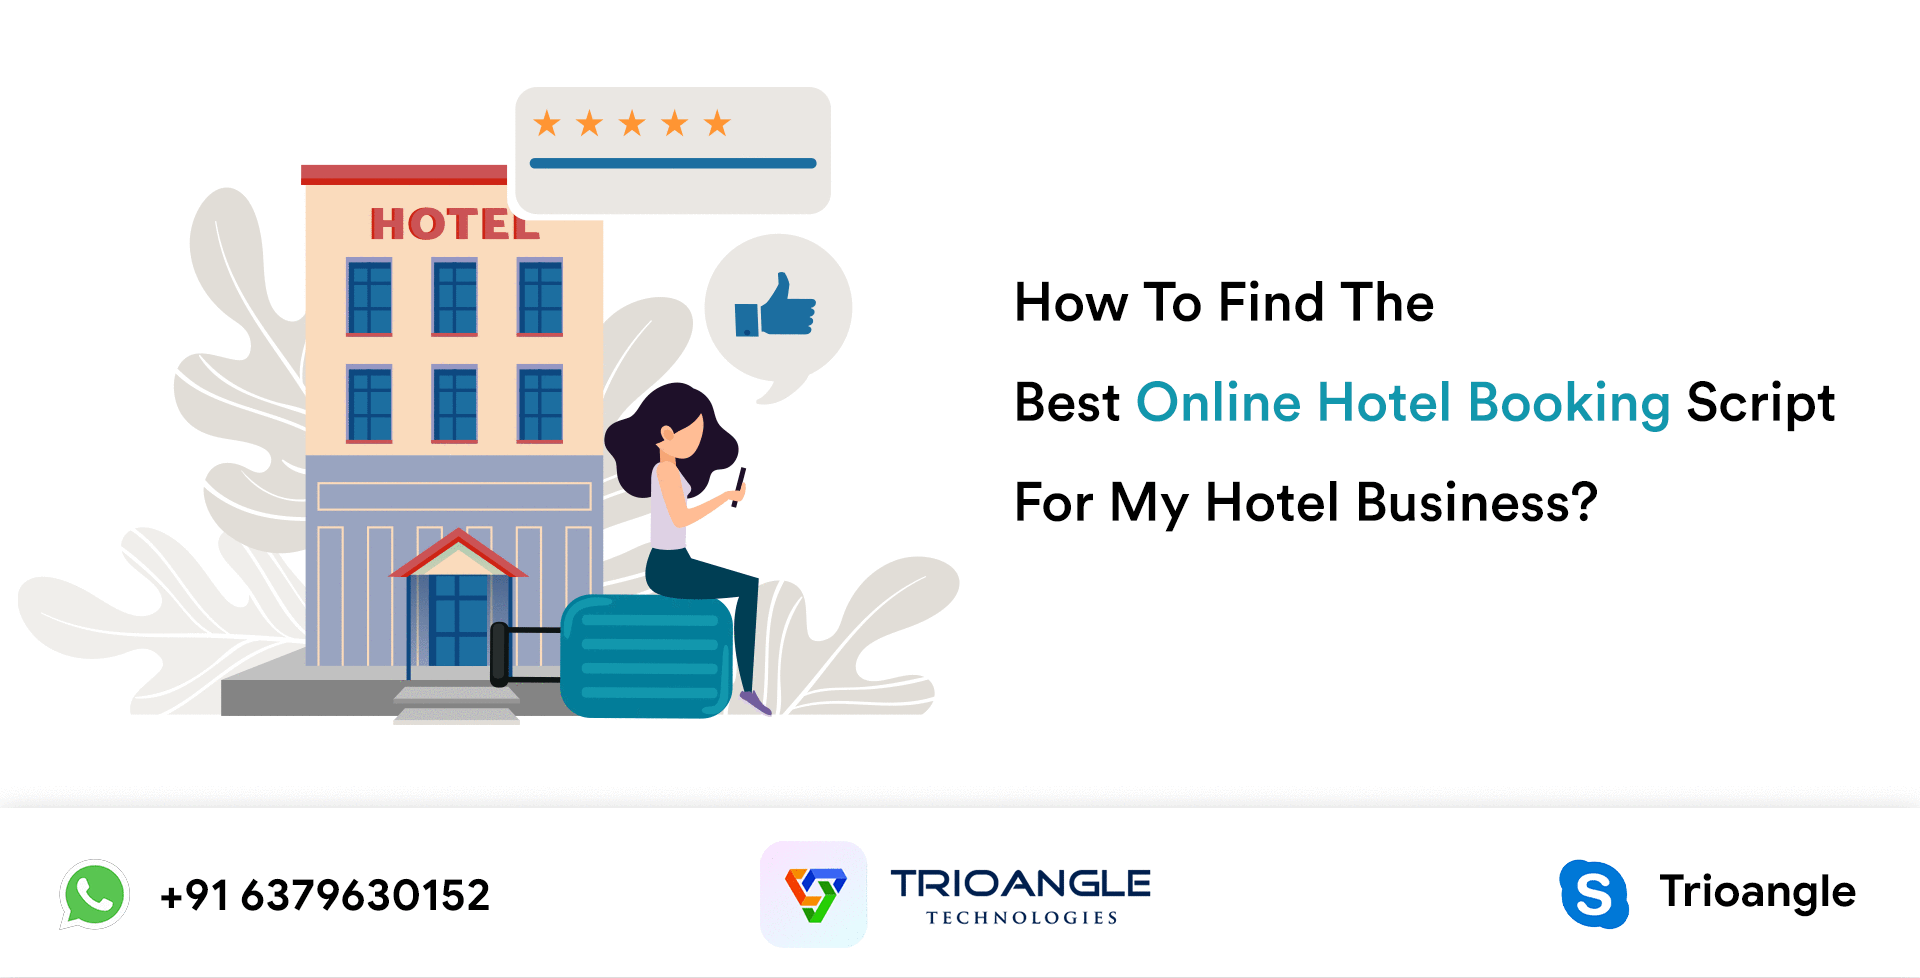 How To Find The Best Online Hotel Booking Script For My Hotel Business?